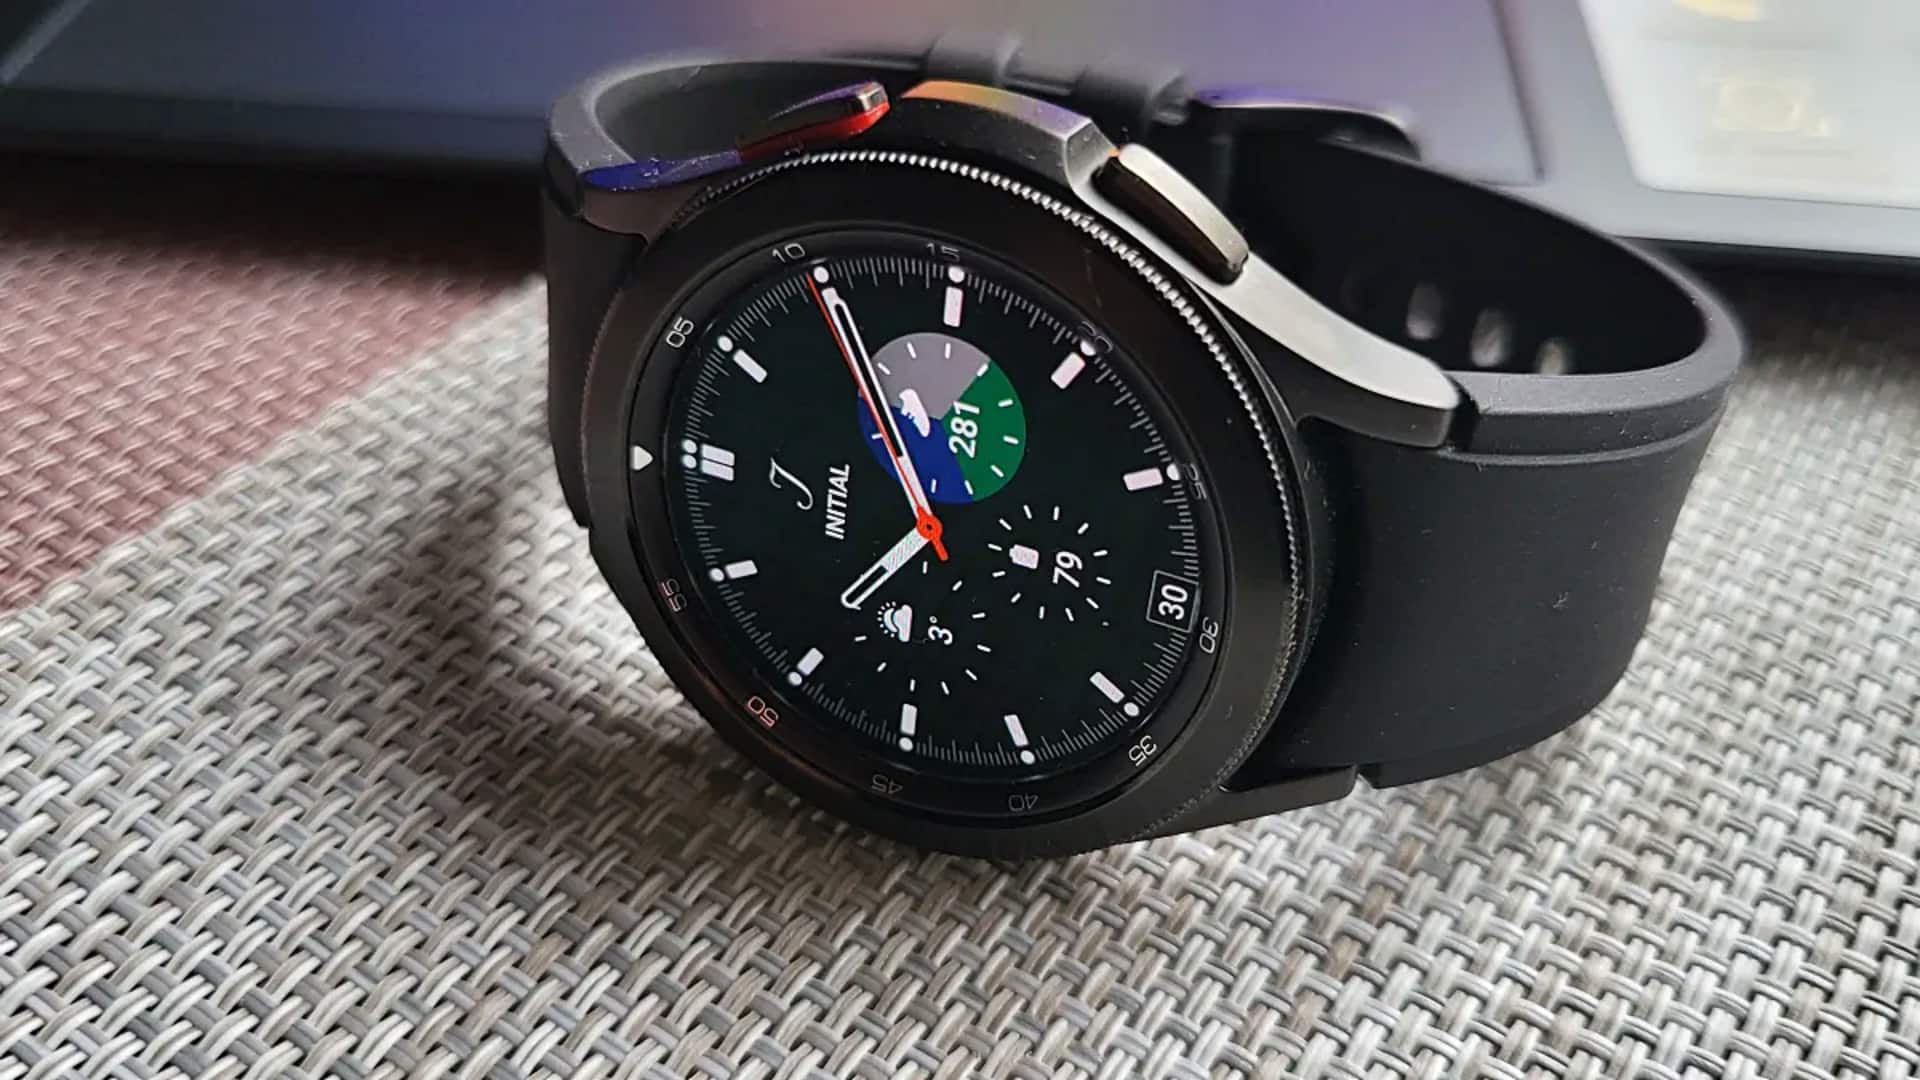 Samsung Galaxy Watch FE in the works: What we know